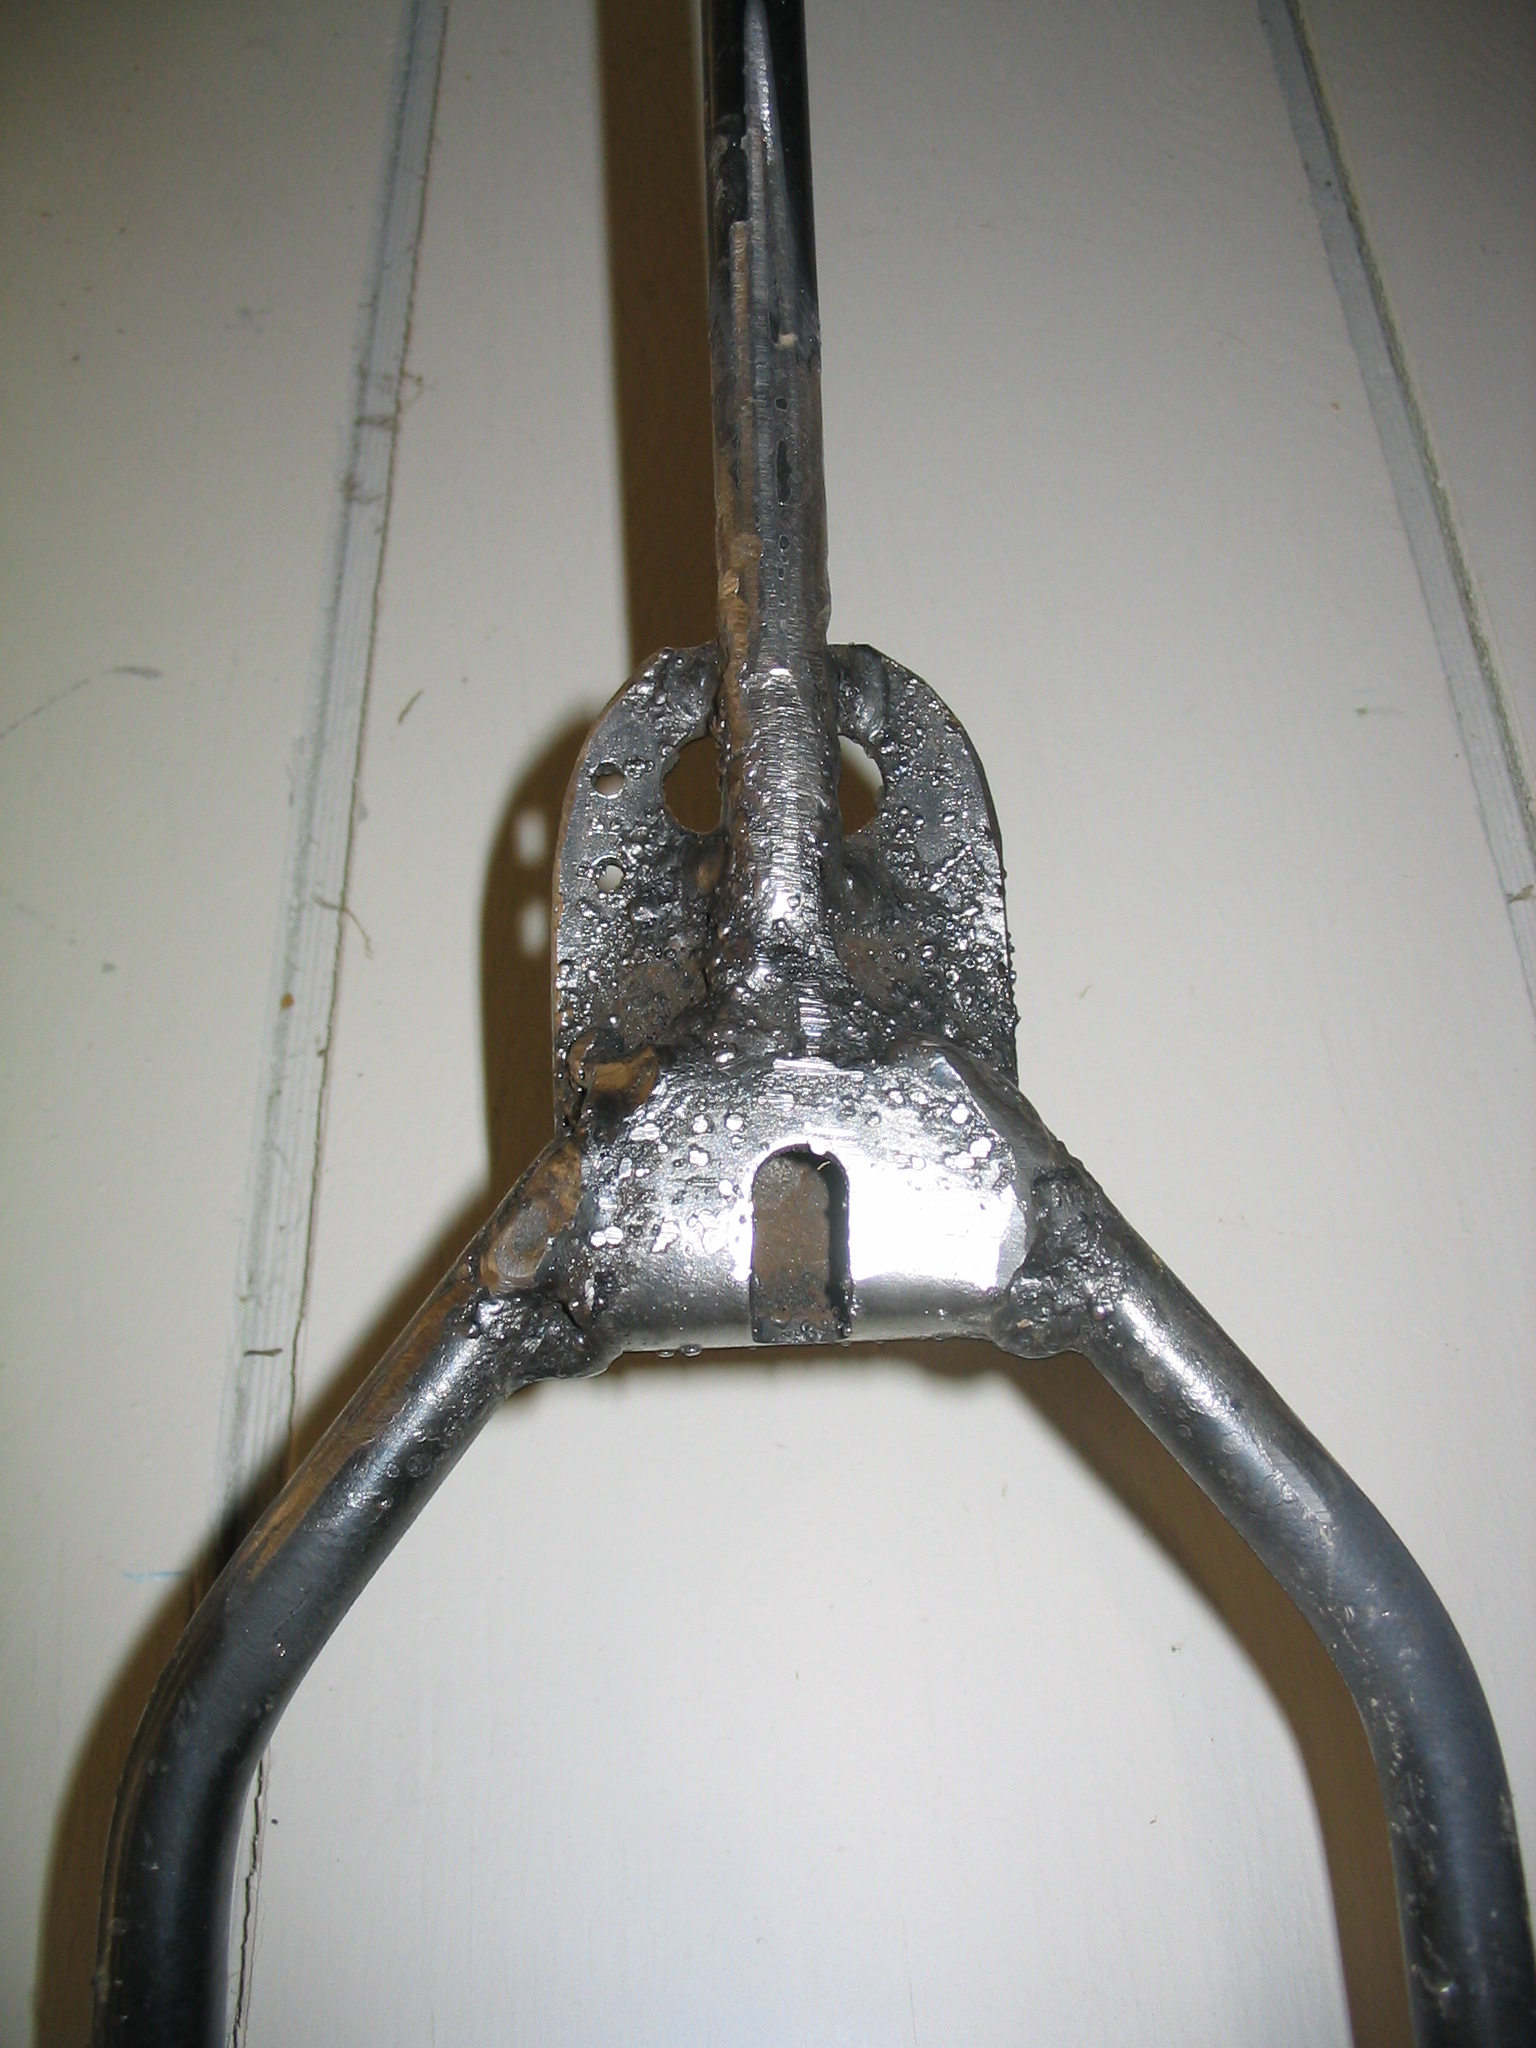 Welded joint with bracket